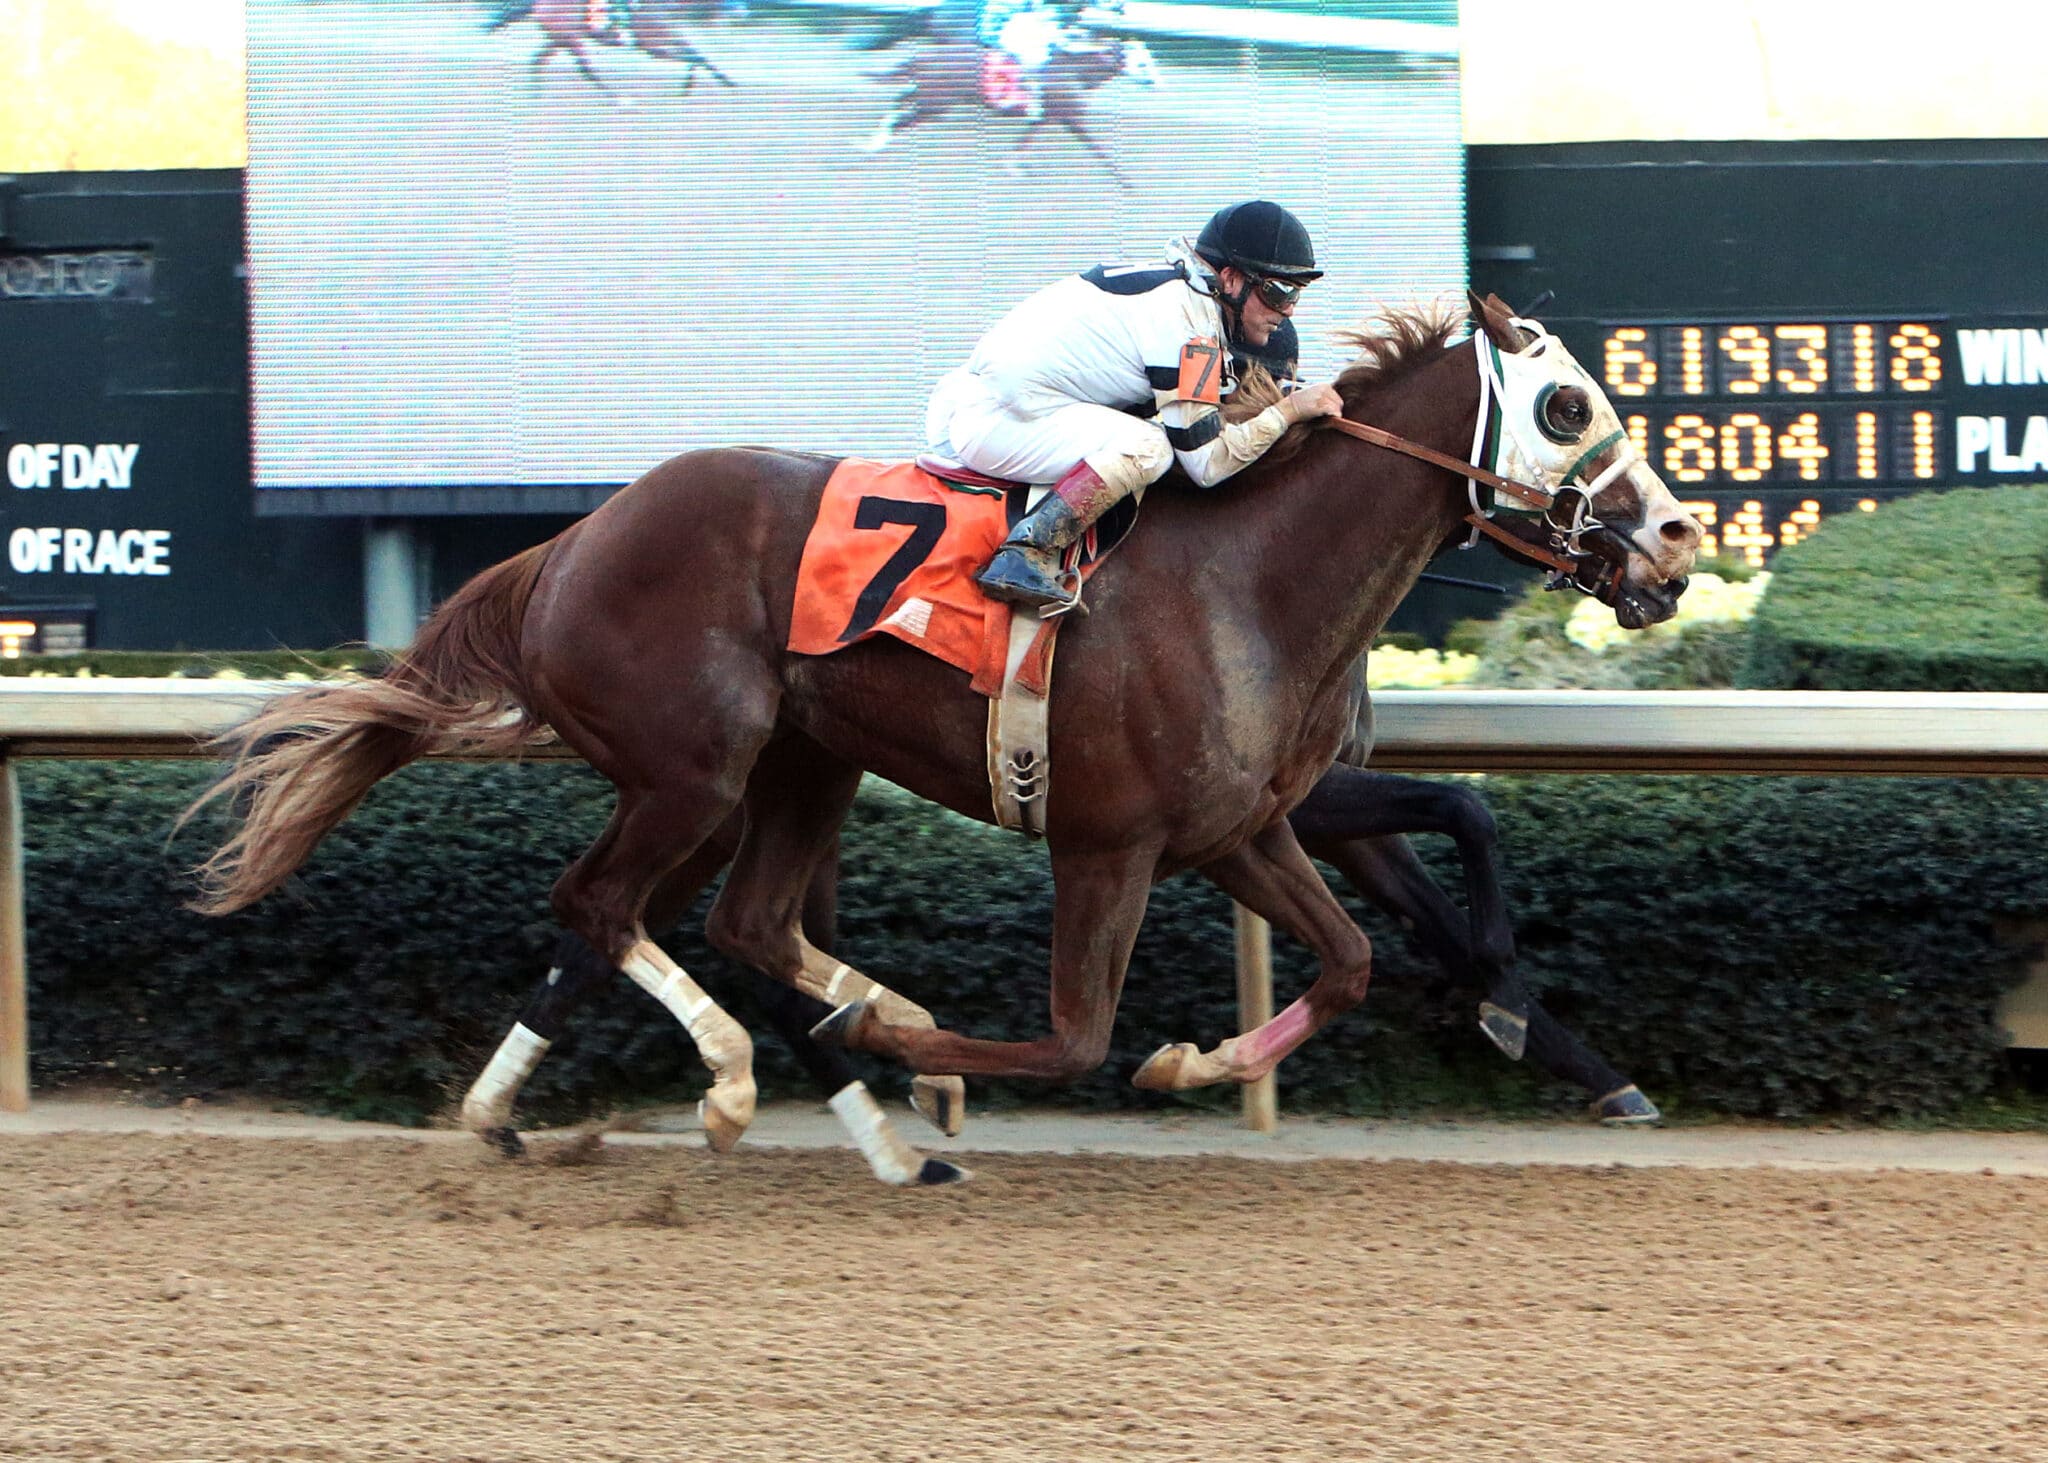 2013 Kentucky Derby Point Standings: Black Onyx, Govenor Charlie Join Party